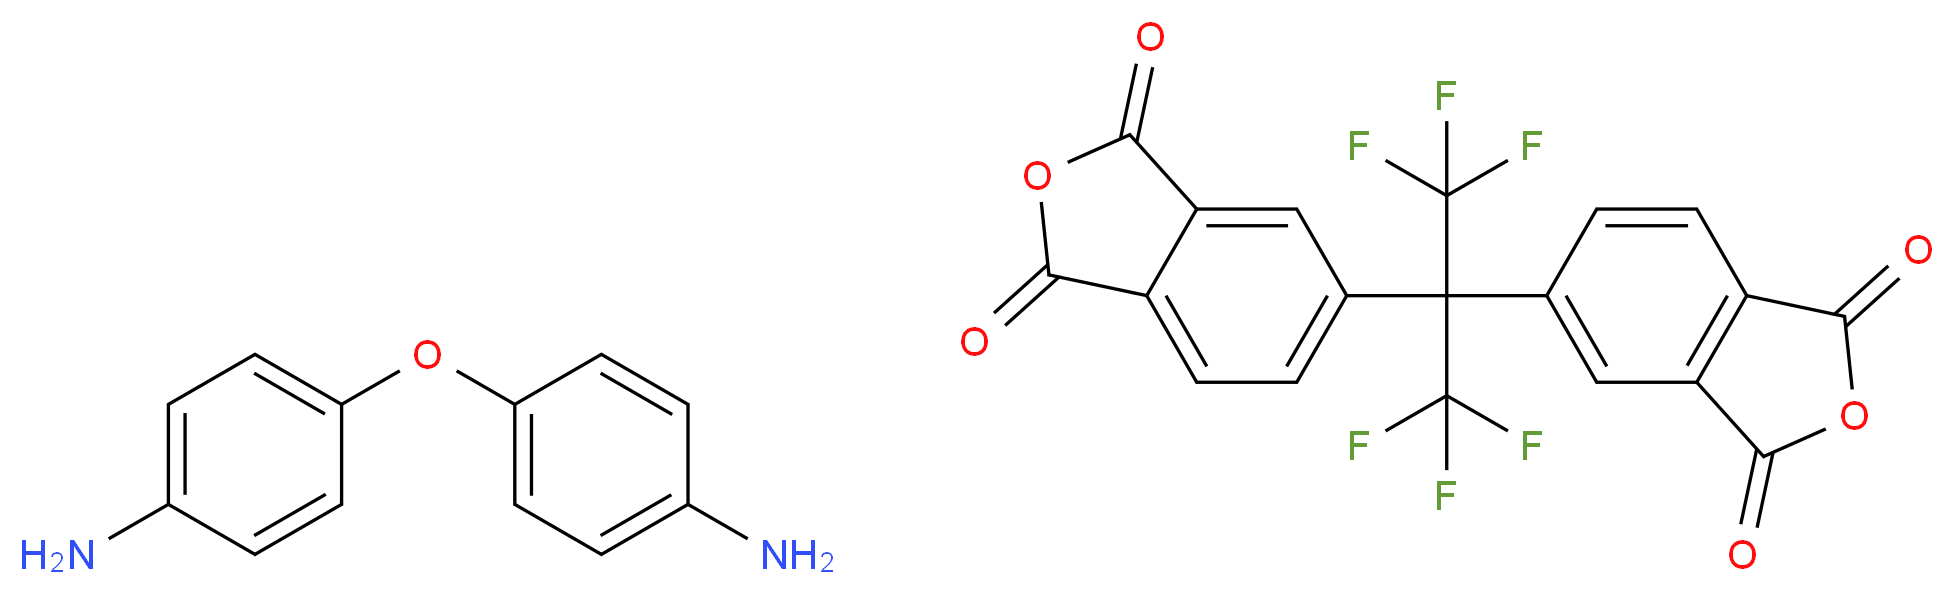 Poly[4,4′-(hexafluoroisopropylidene)diphthalic anhydride-co-4,4′-oxydianiline], amic acid solution_Molecular_structure_CAS_32240-73-6)